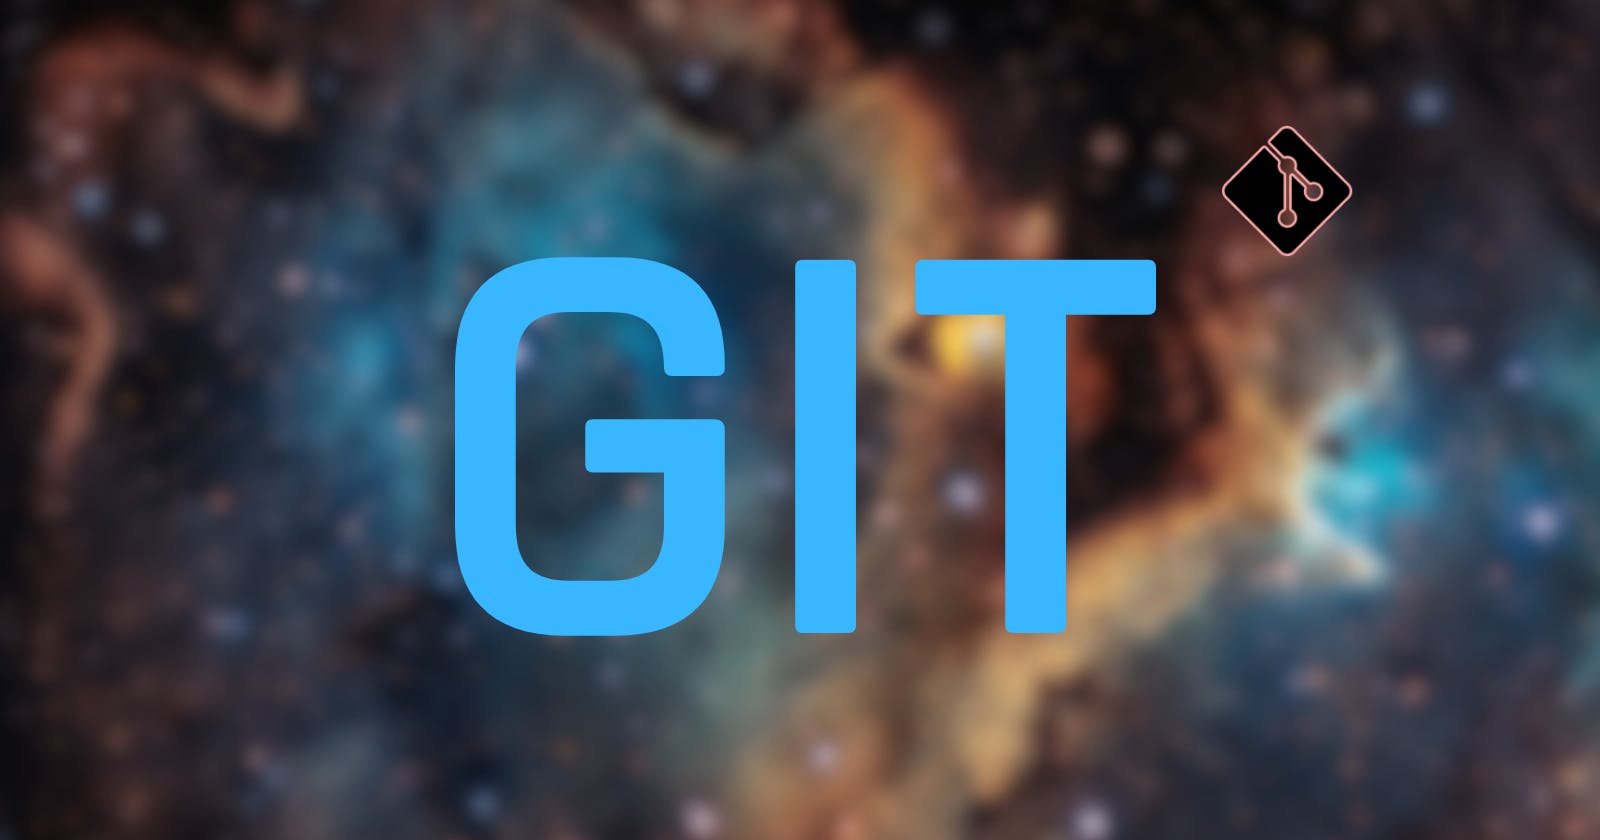 How to Setup Git and GitHub on macOS in 5 Minutes